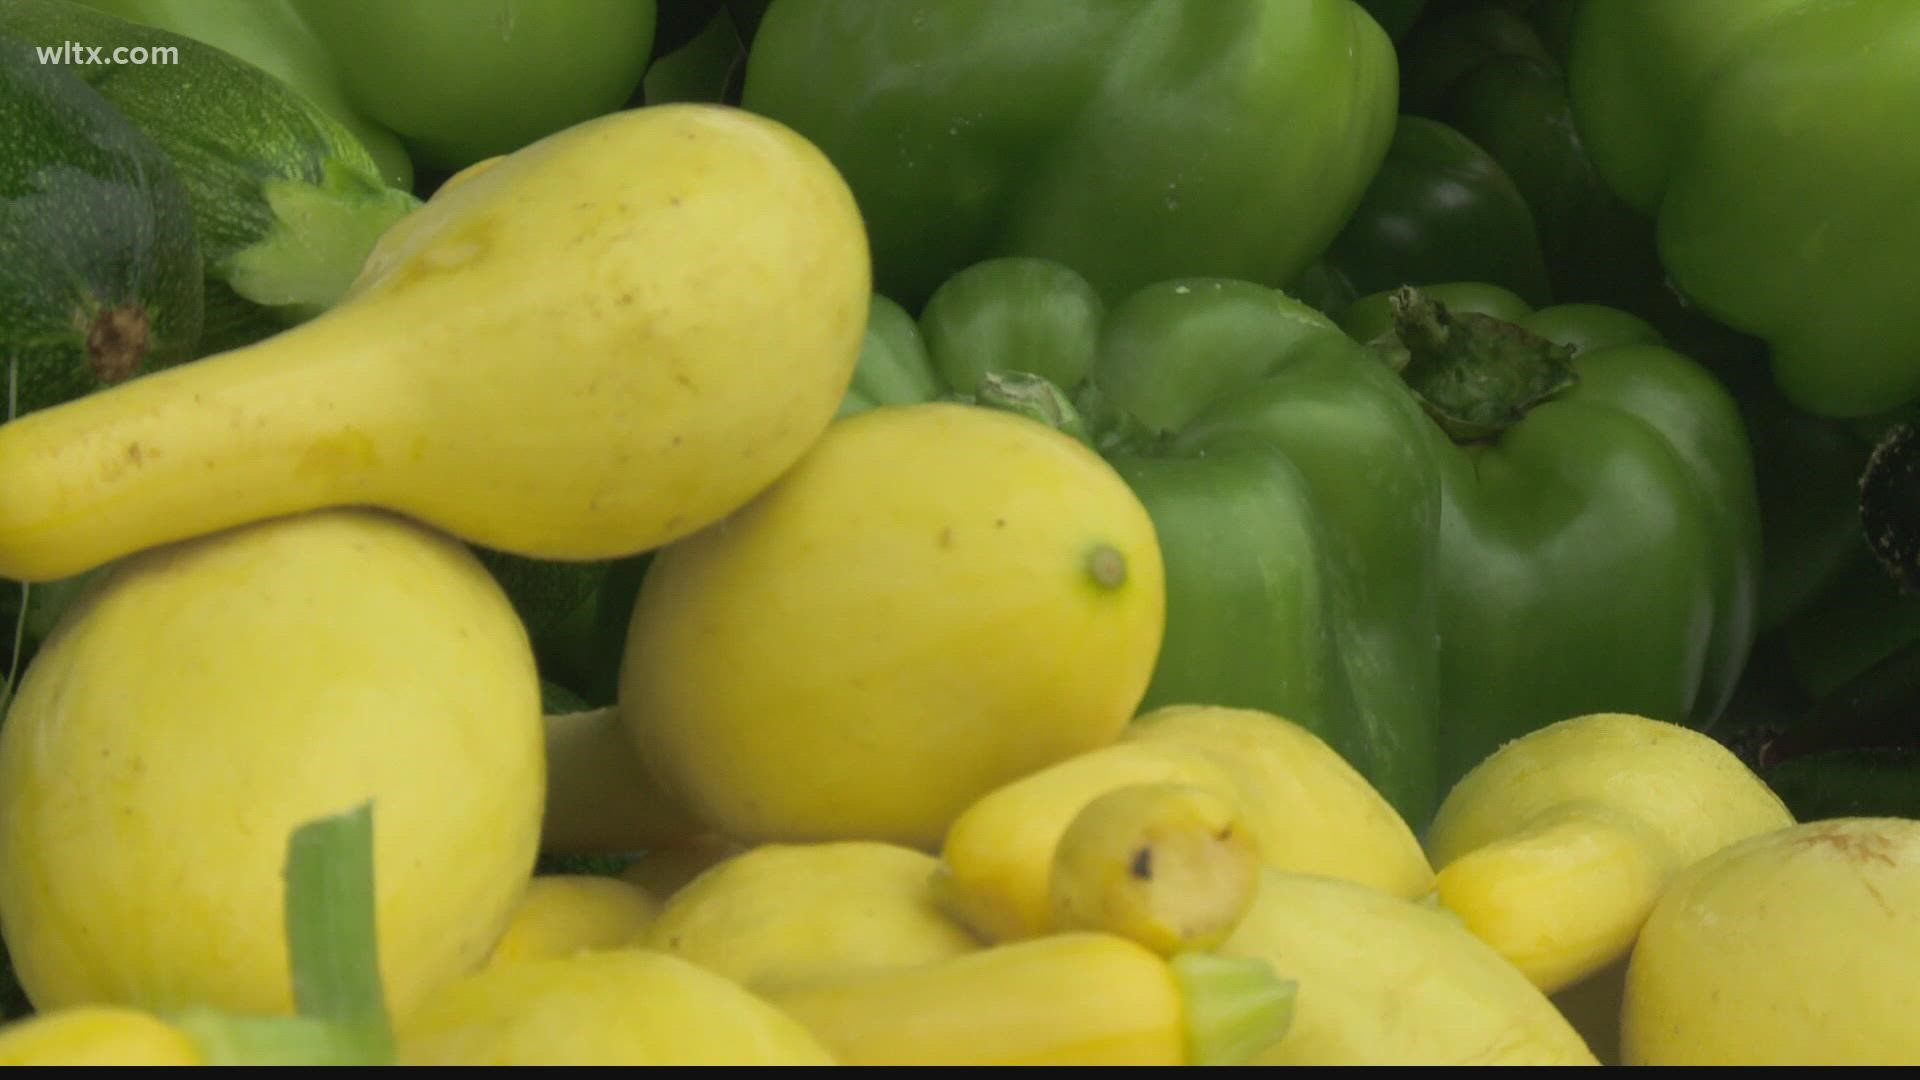 A new statewide network, Growing Local SC, has been created to make it easier for SC farmers and food producers to get their products from the farm to your table.